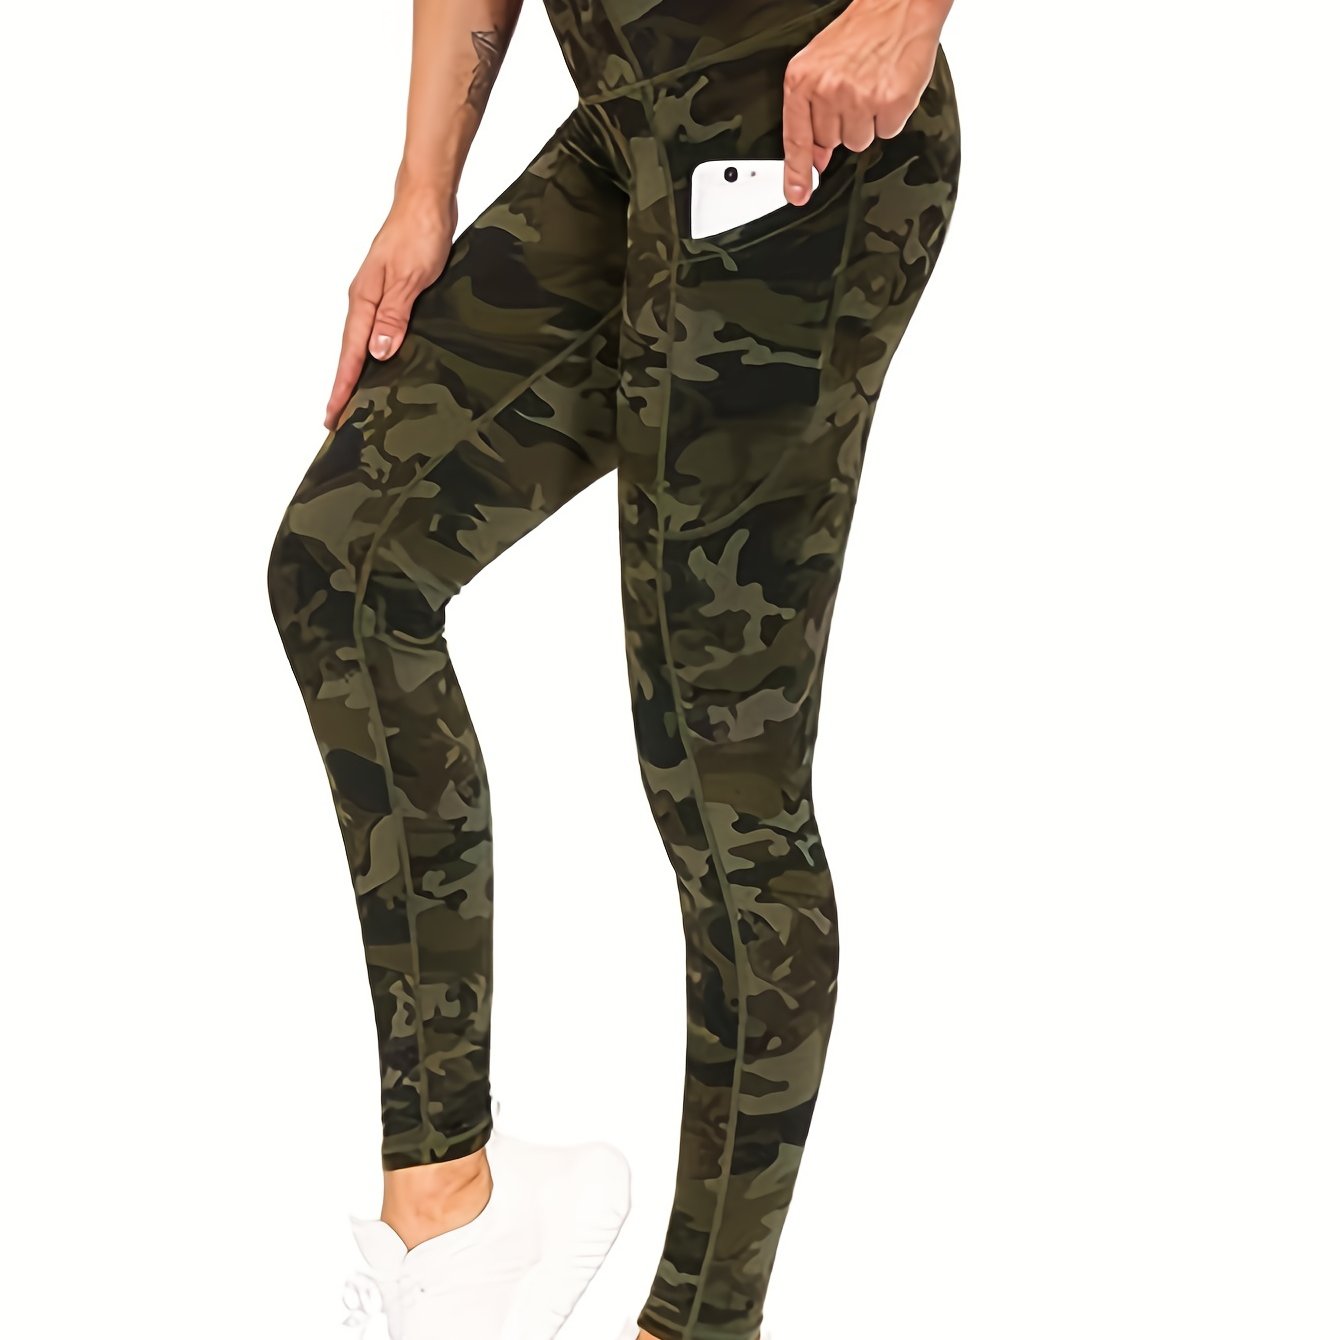 Phonepocketed Plus Size Sports Leggings High Stretch Butt Lifting Yellow Camouflage